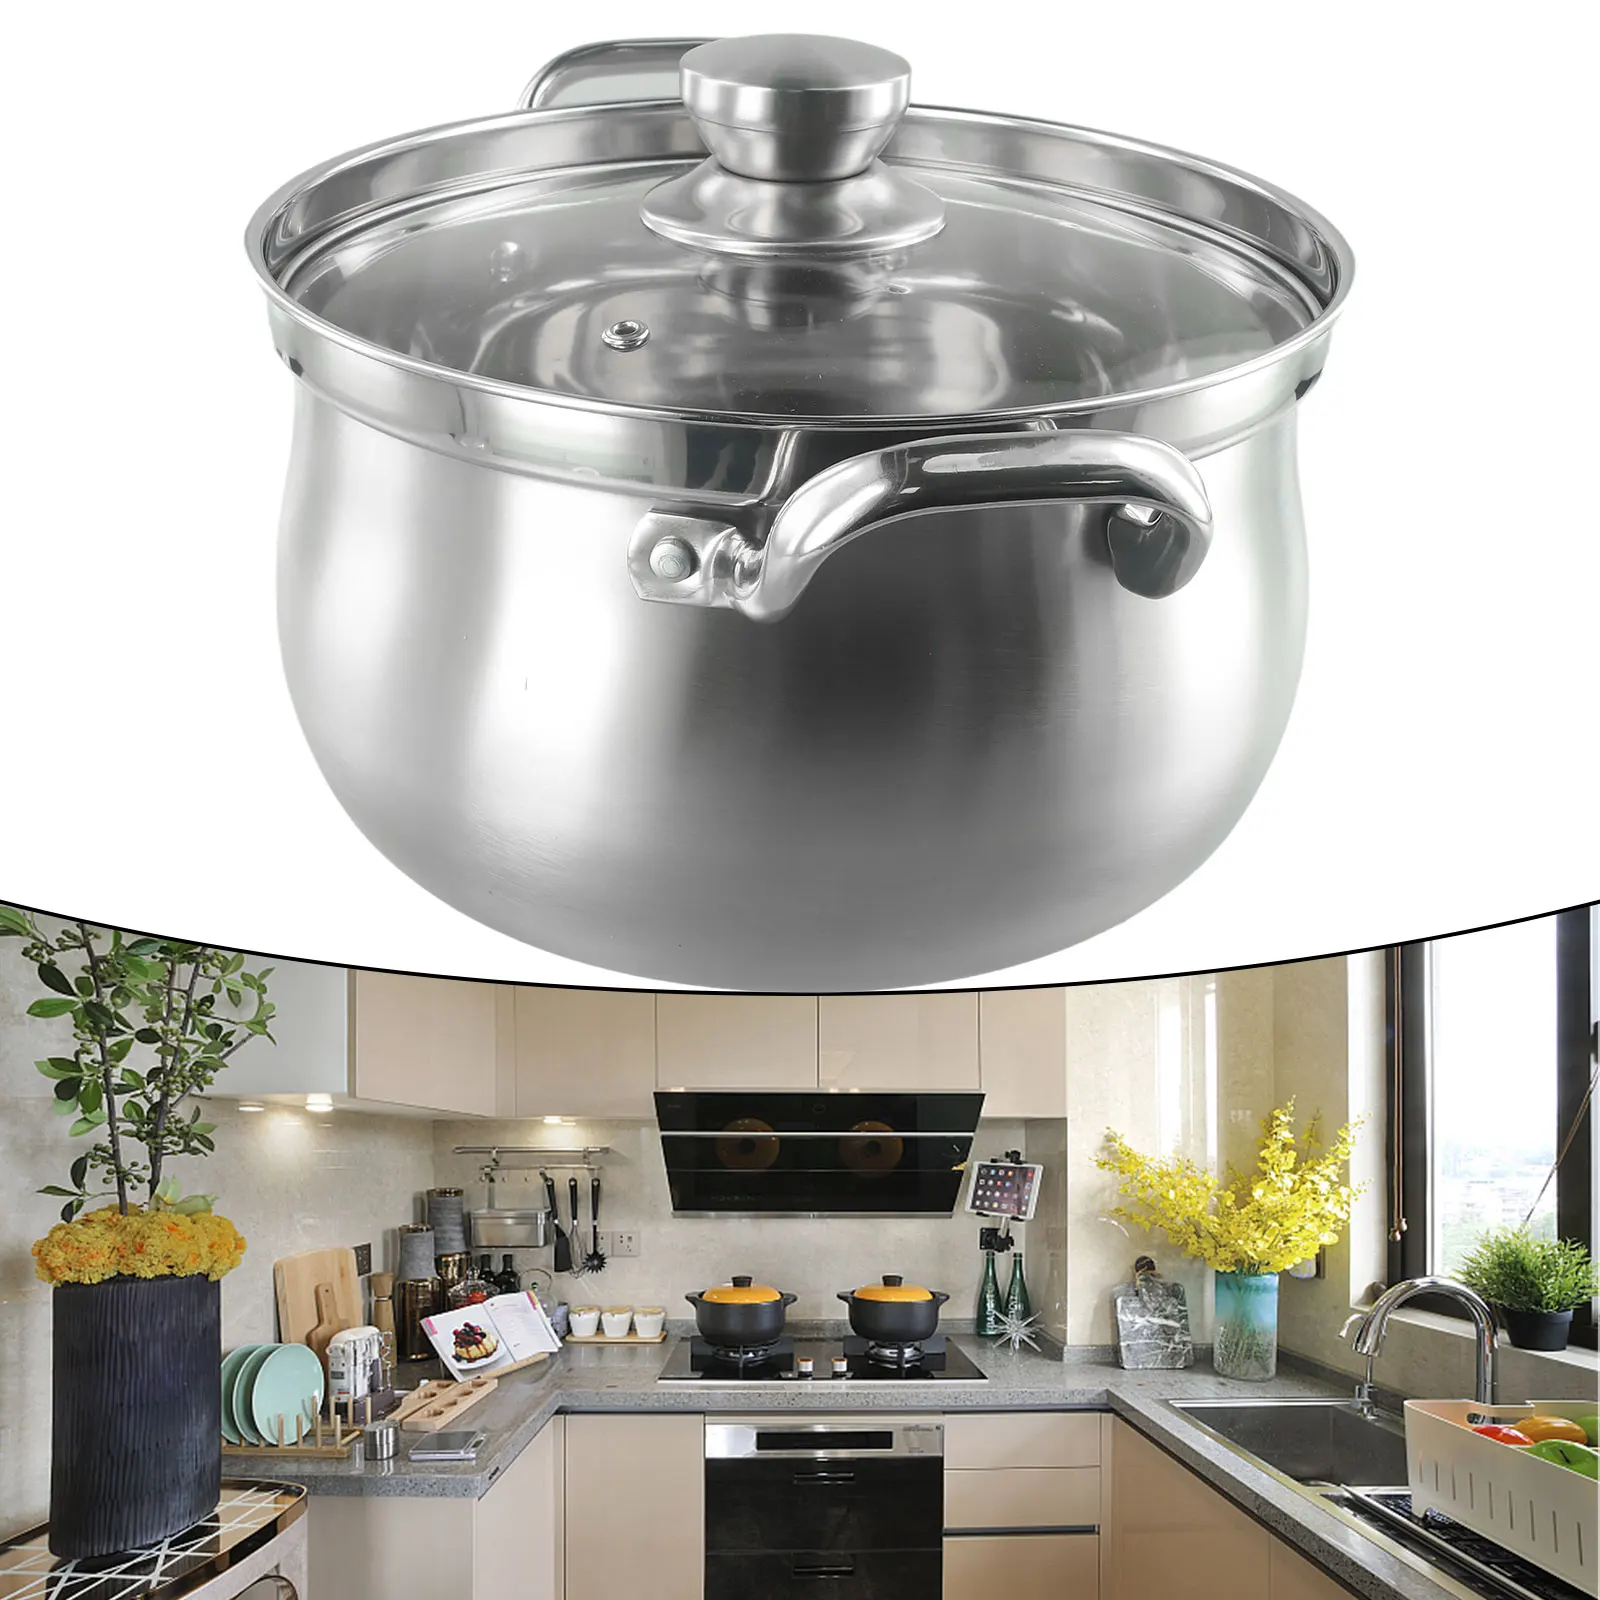 

Cooking Pots Soup Pot Stockpot With Glass Lid 1 Set 24x13.7cm Cookware Silvery Stainless Steel Kitchen Accessories